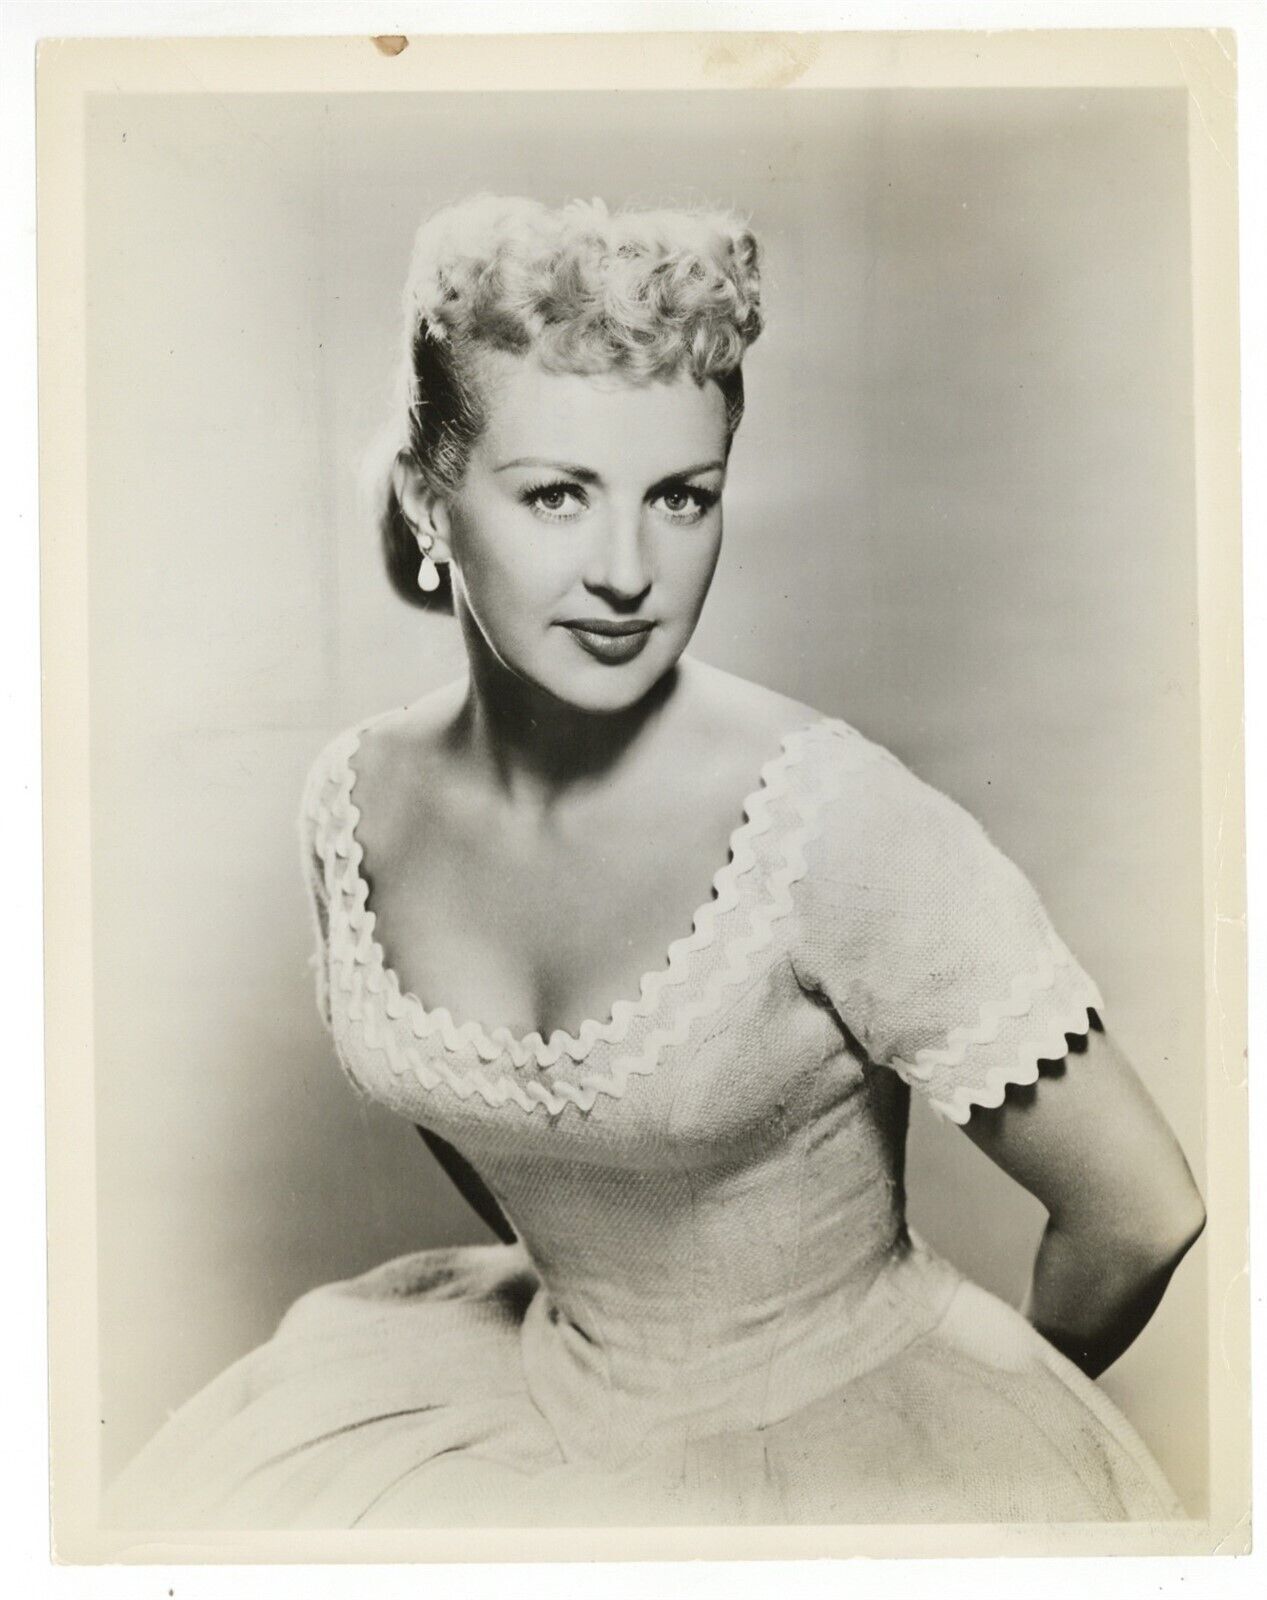 Betty Grable Glamour Portrait 1955 Bob Hope Show 8x10 Pin-Up w/Credits J9259